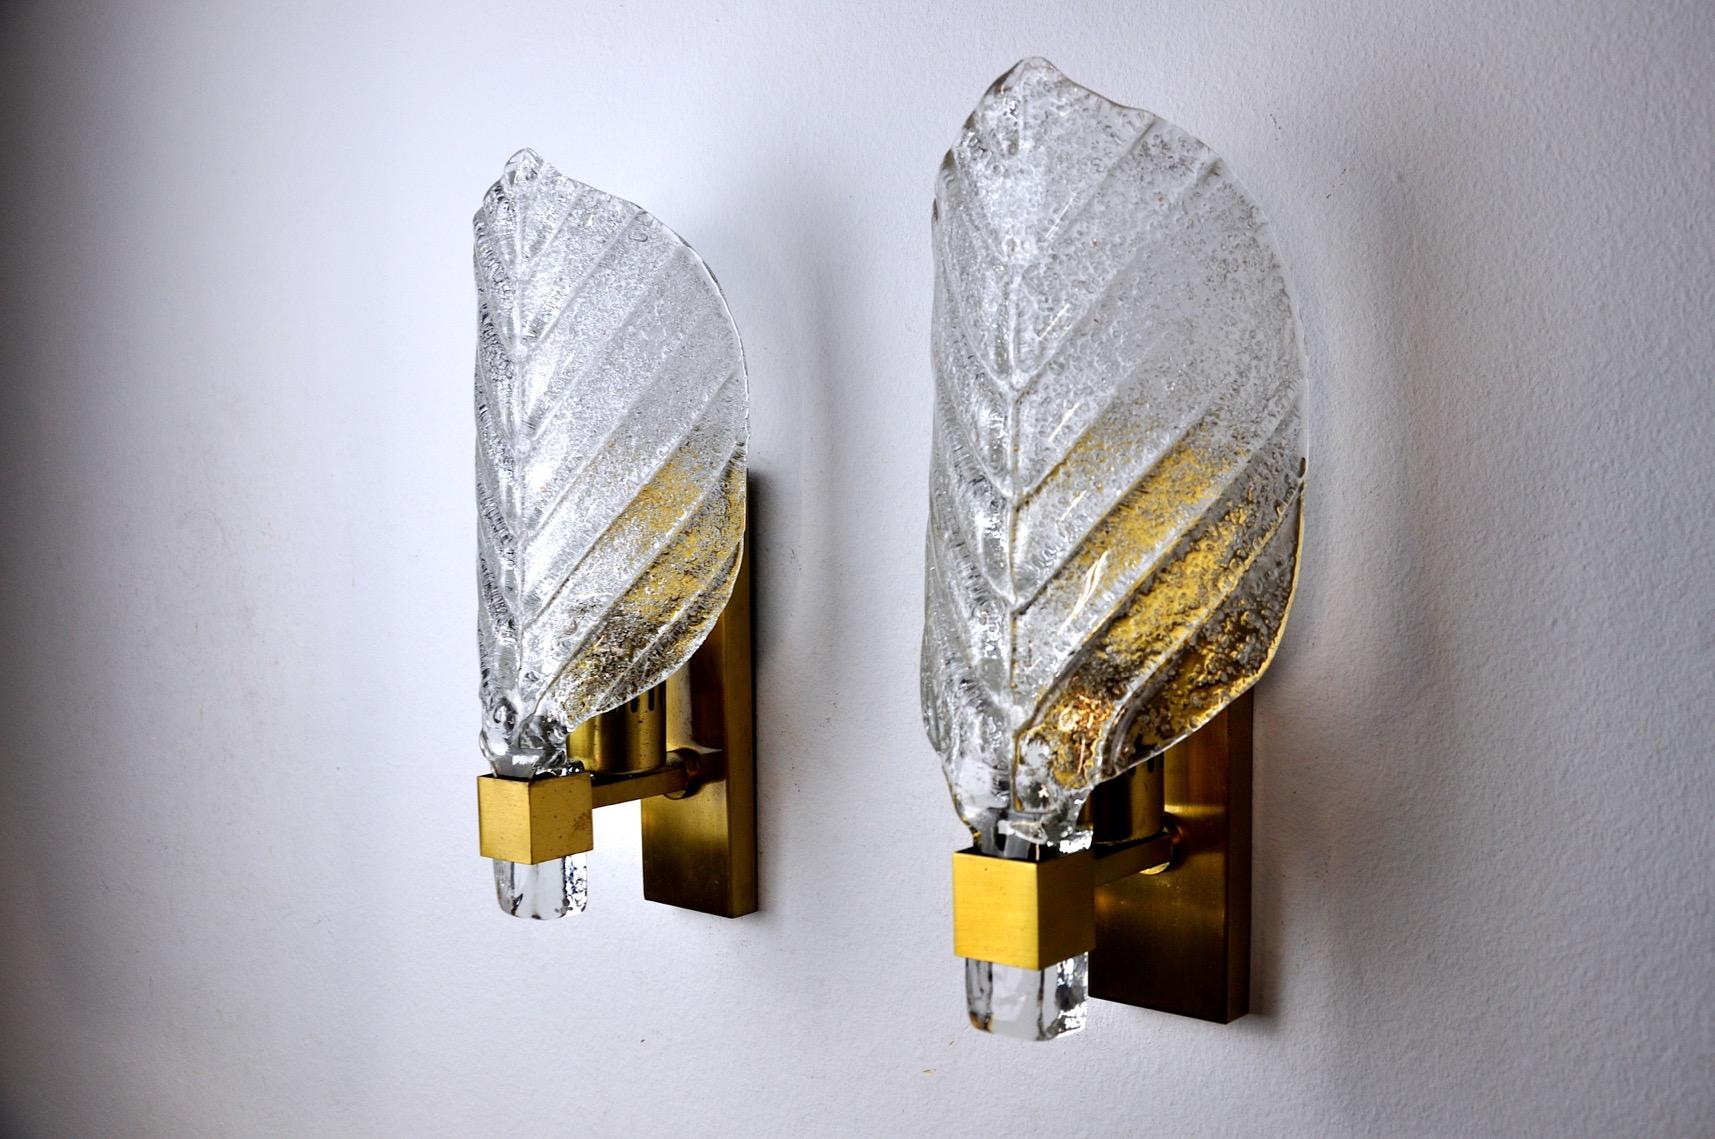 Pair of wall lights by carl fagerlund for lyfa from the 60s. The pair of wall lights is made of brass and leaf-shaped glass. The diffused light is soft and harmonious, perfect for illuminating your interior. Mark of time consistent with the age of